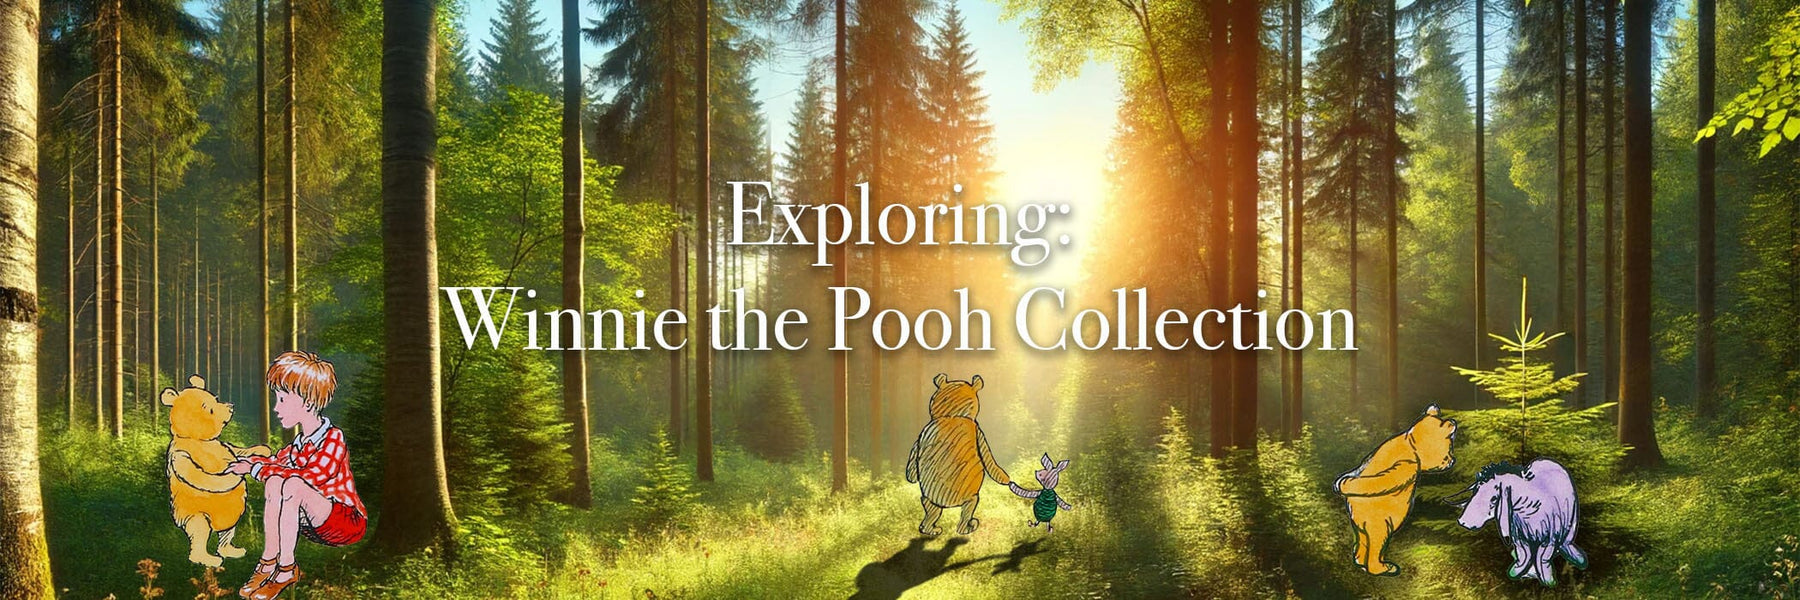 Return to the Hundred Acre Wood: Exploring the Winnie the Pooh Collectionto the Hundred Acre Wood: Exploring the Winnie the Pooh Collection